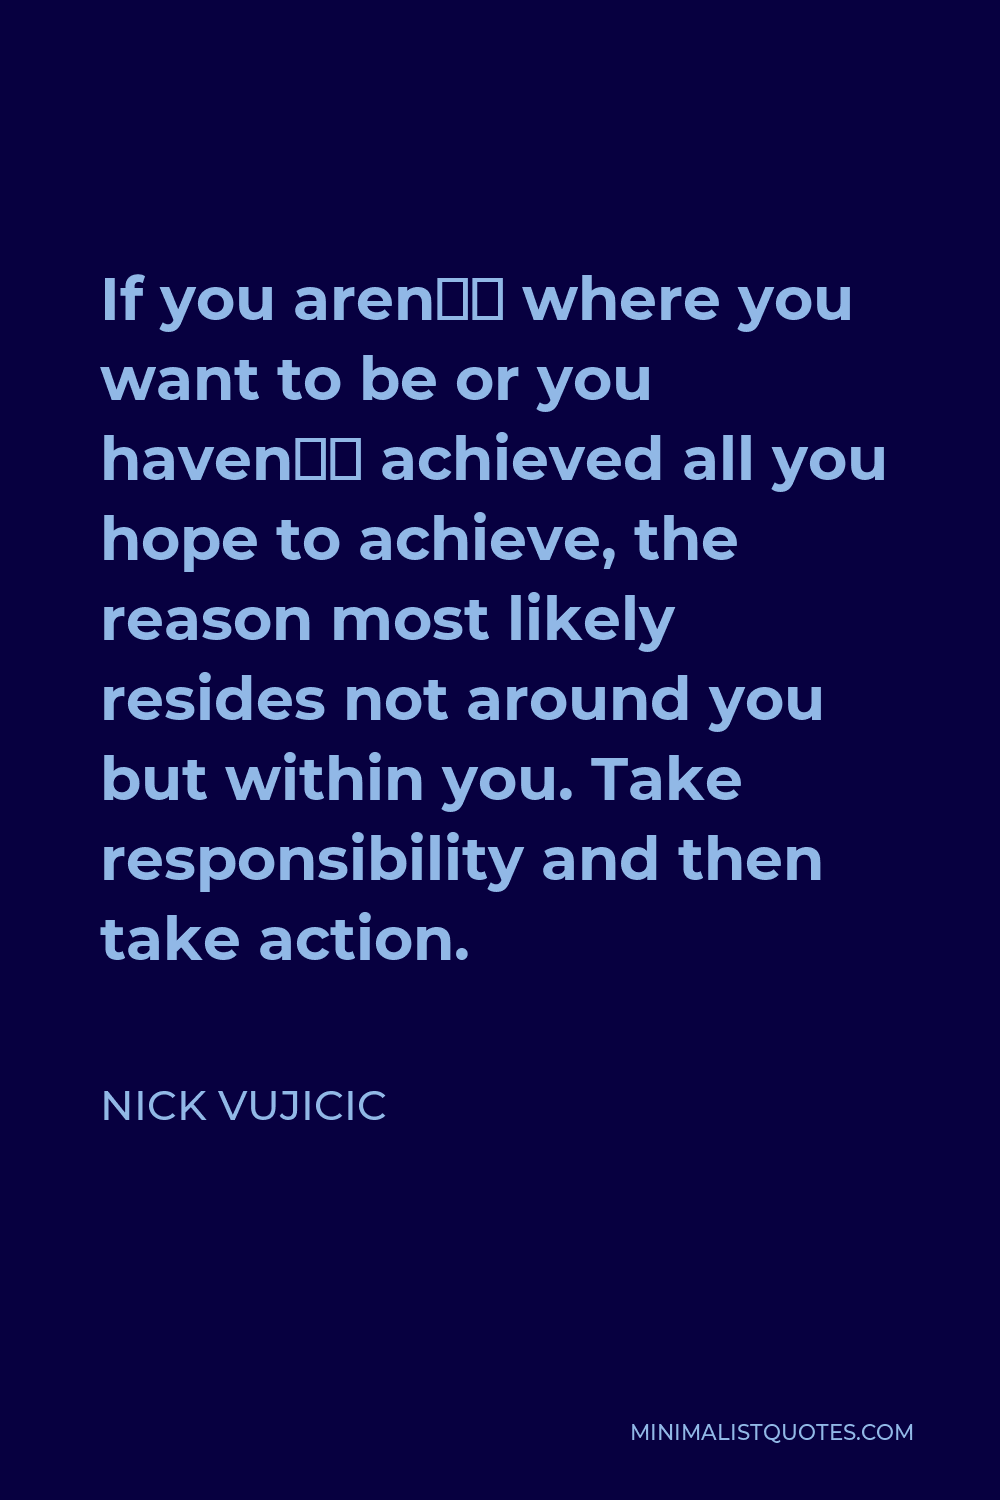 Nick Vujicic Quote - If you aren’t where you want to be or you haven’t achieved all you hope to achieve, the reason most likely resides not around you but within you. Take responsibility and then take action.